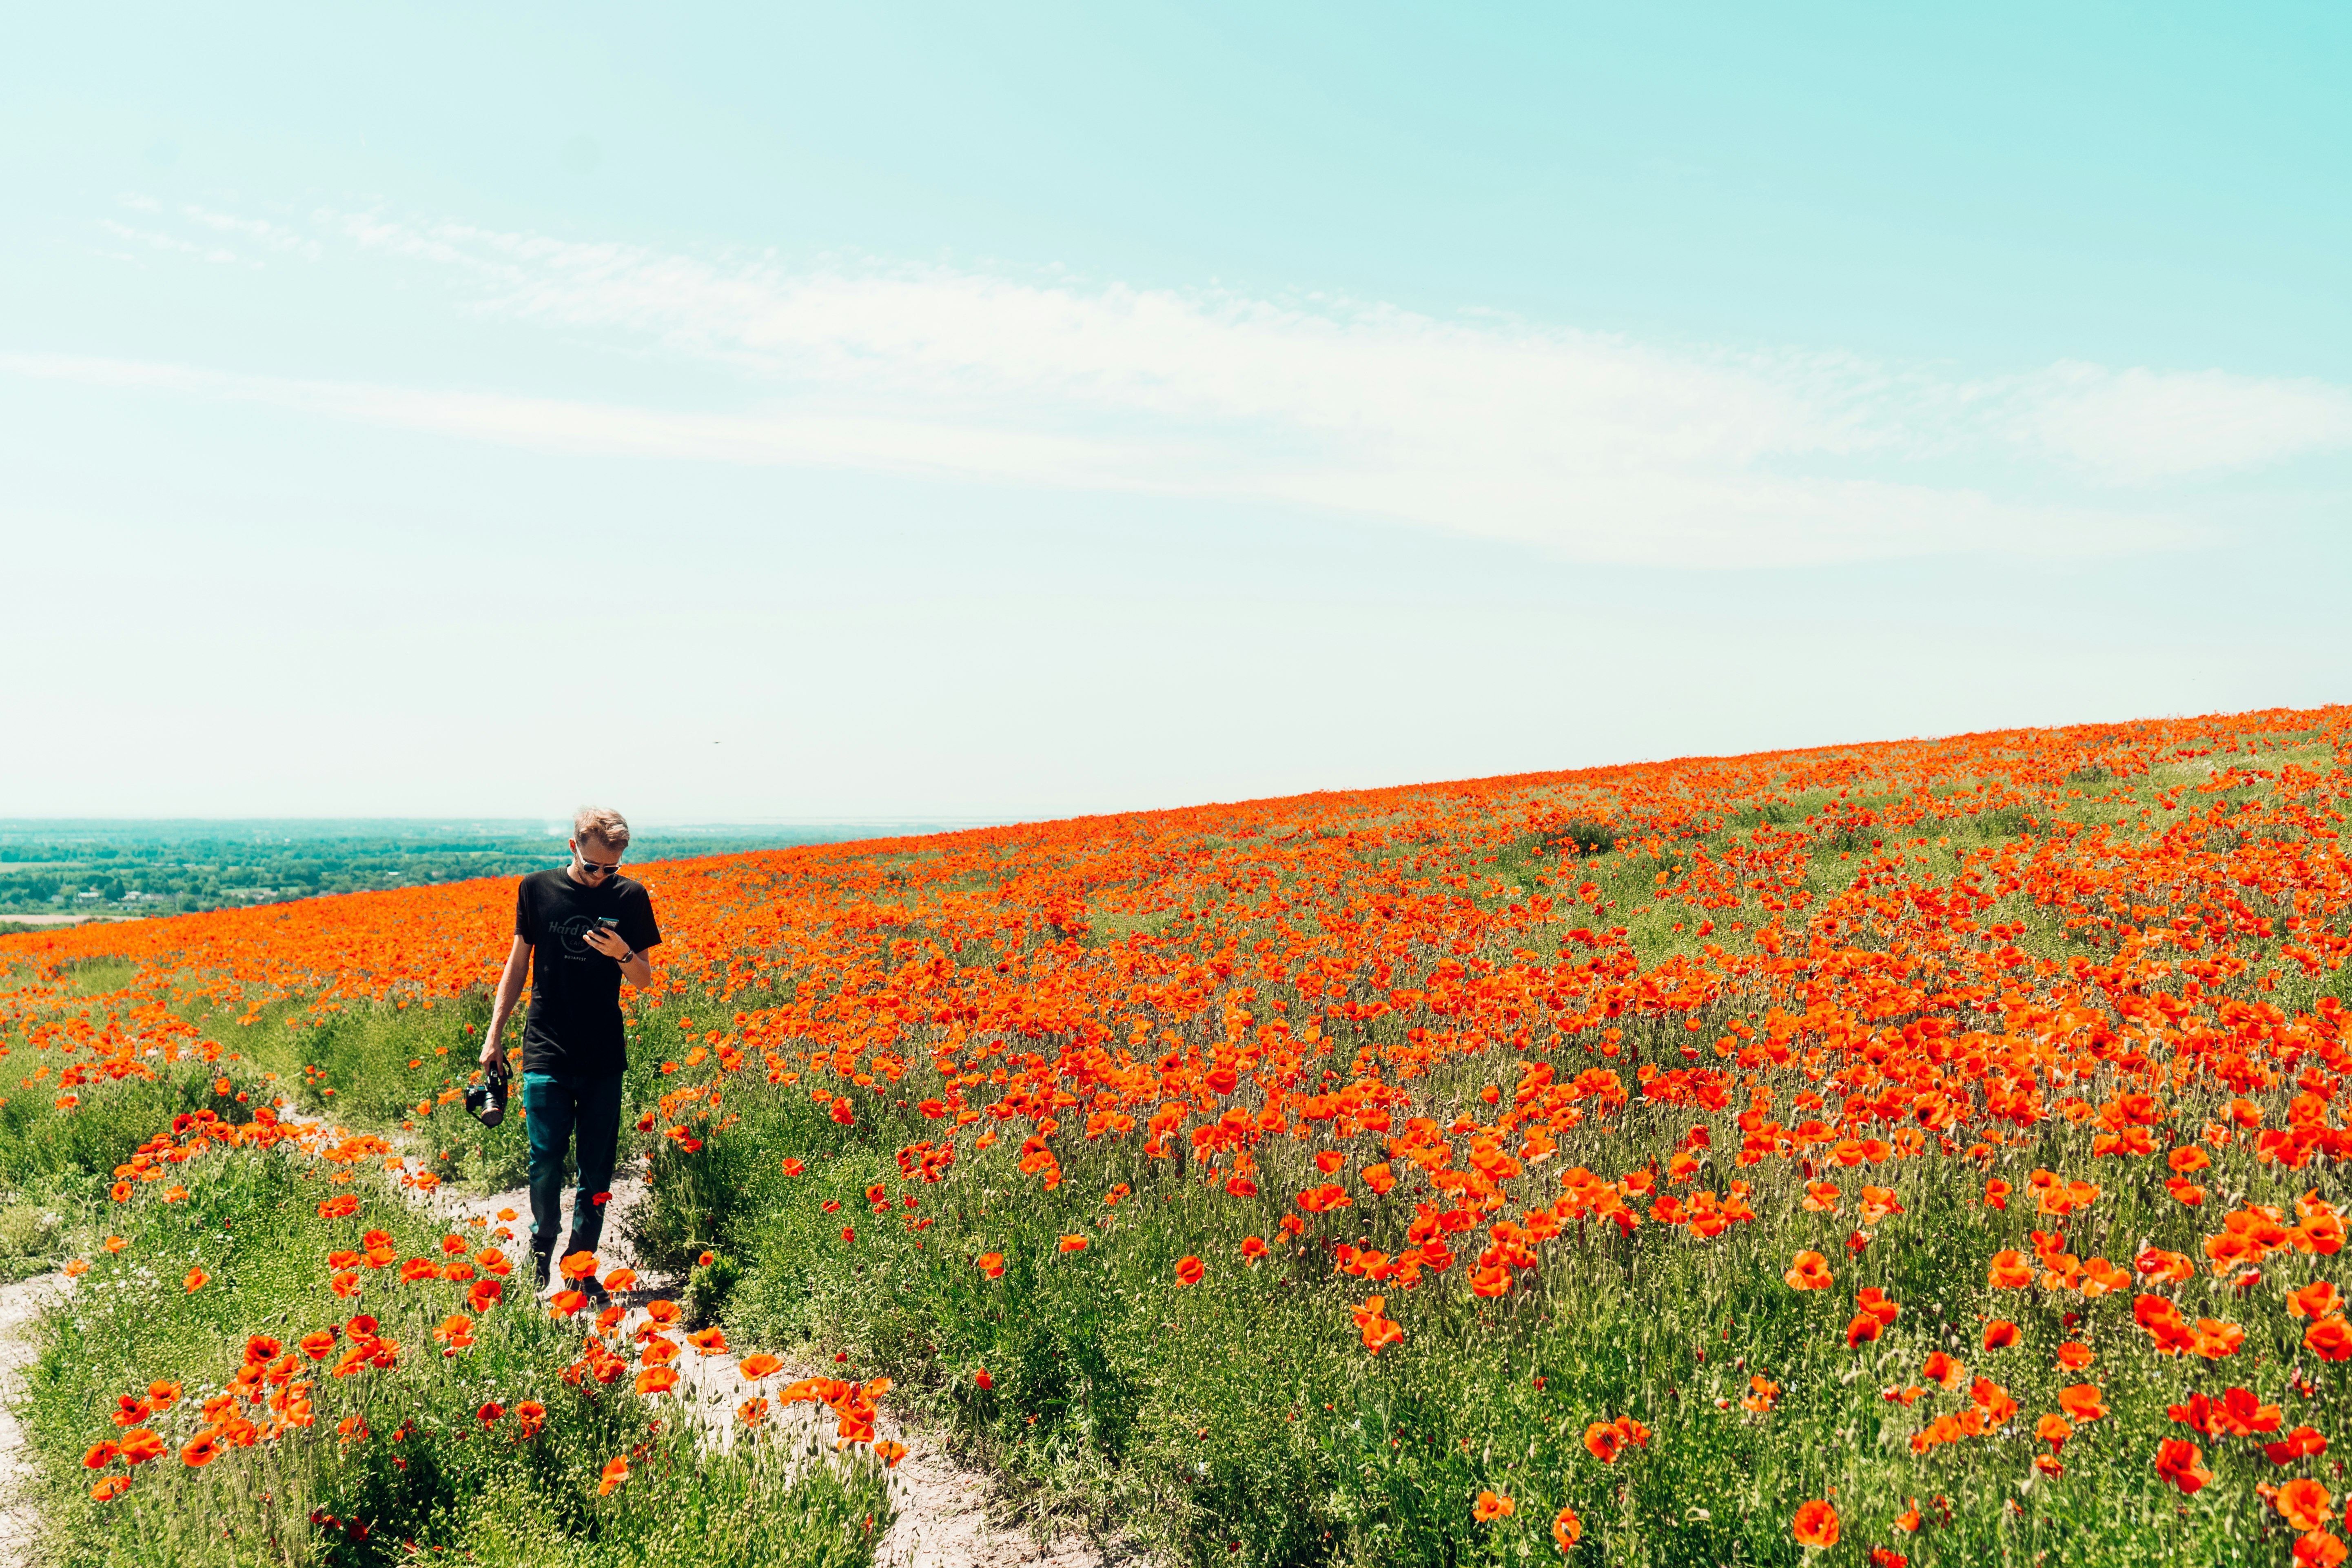 woman in black jacket walking on red flower field during daytime